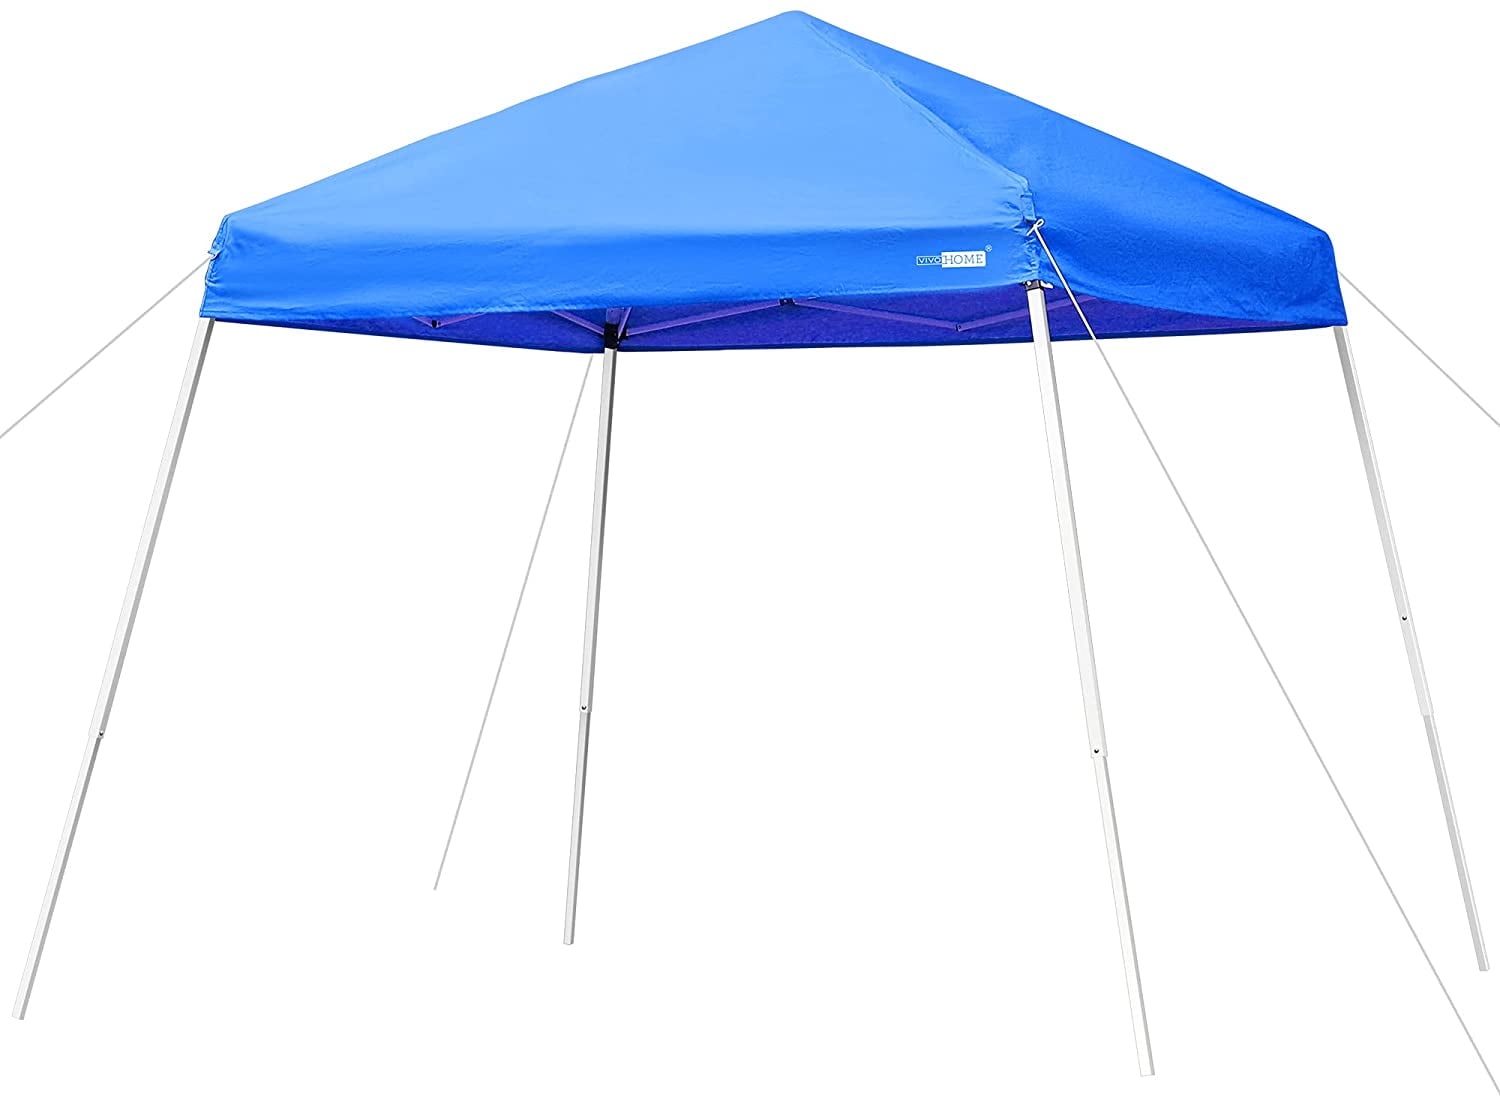 8 x 8 Ft Canopies 10x 10 Ft Base Slant Leg Outdoor Pop up Portable Folding Canopy Tent with Carry Bag,Blue 